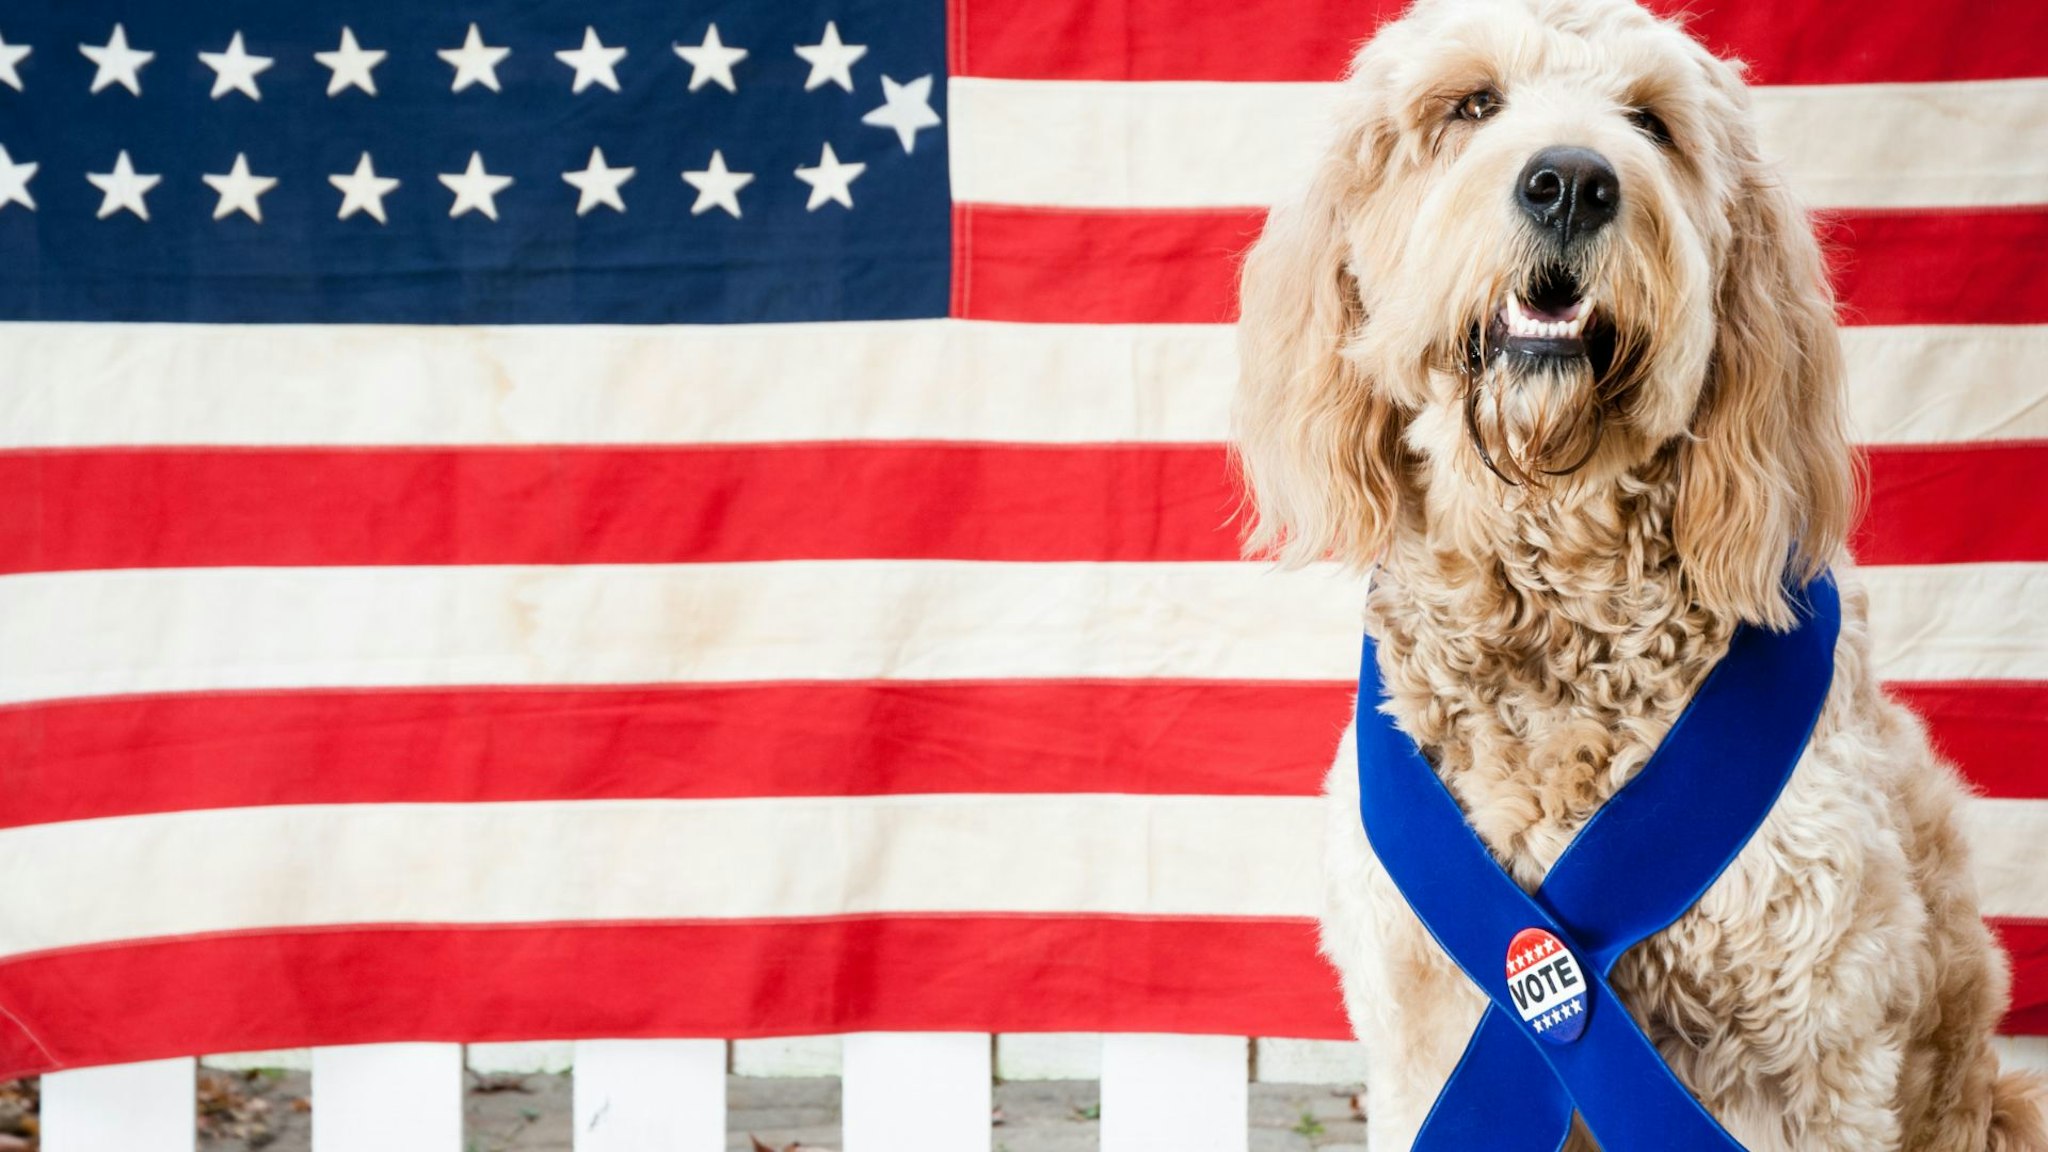 A stock photo of a Golden-doodle dog wearing a Vote button